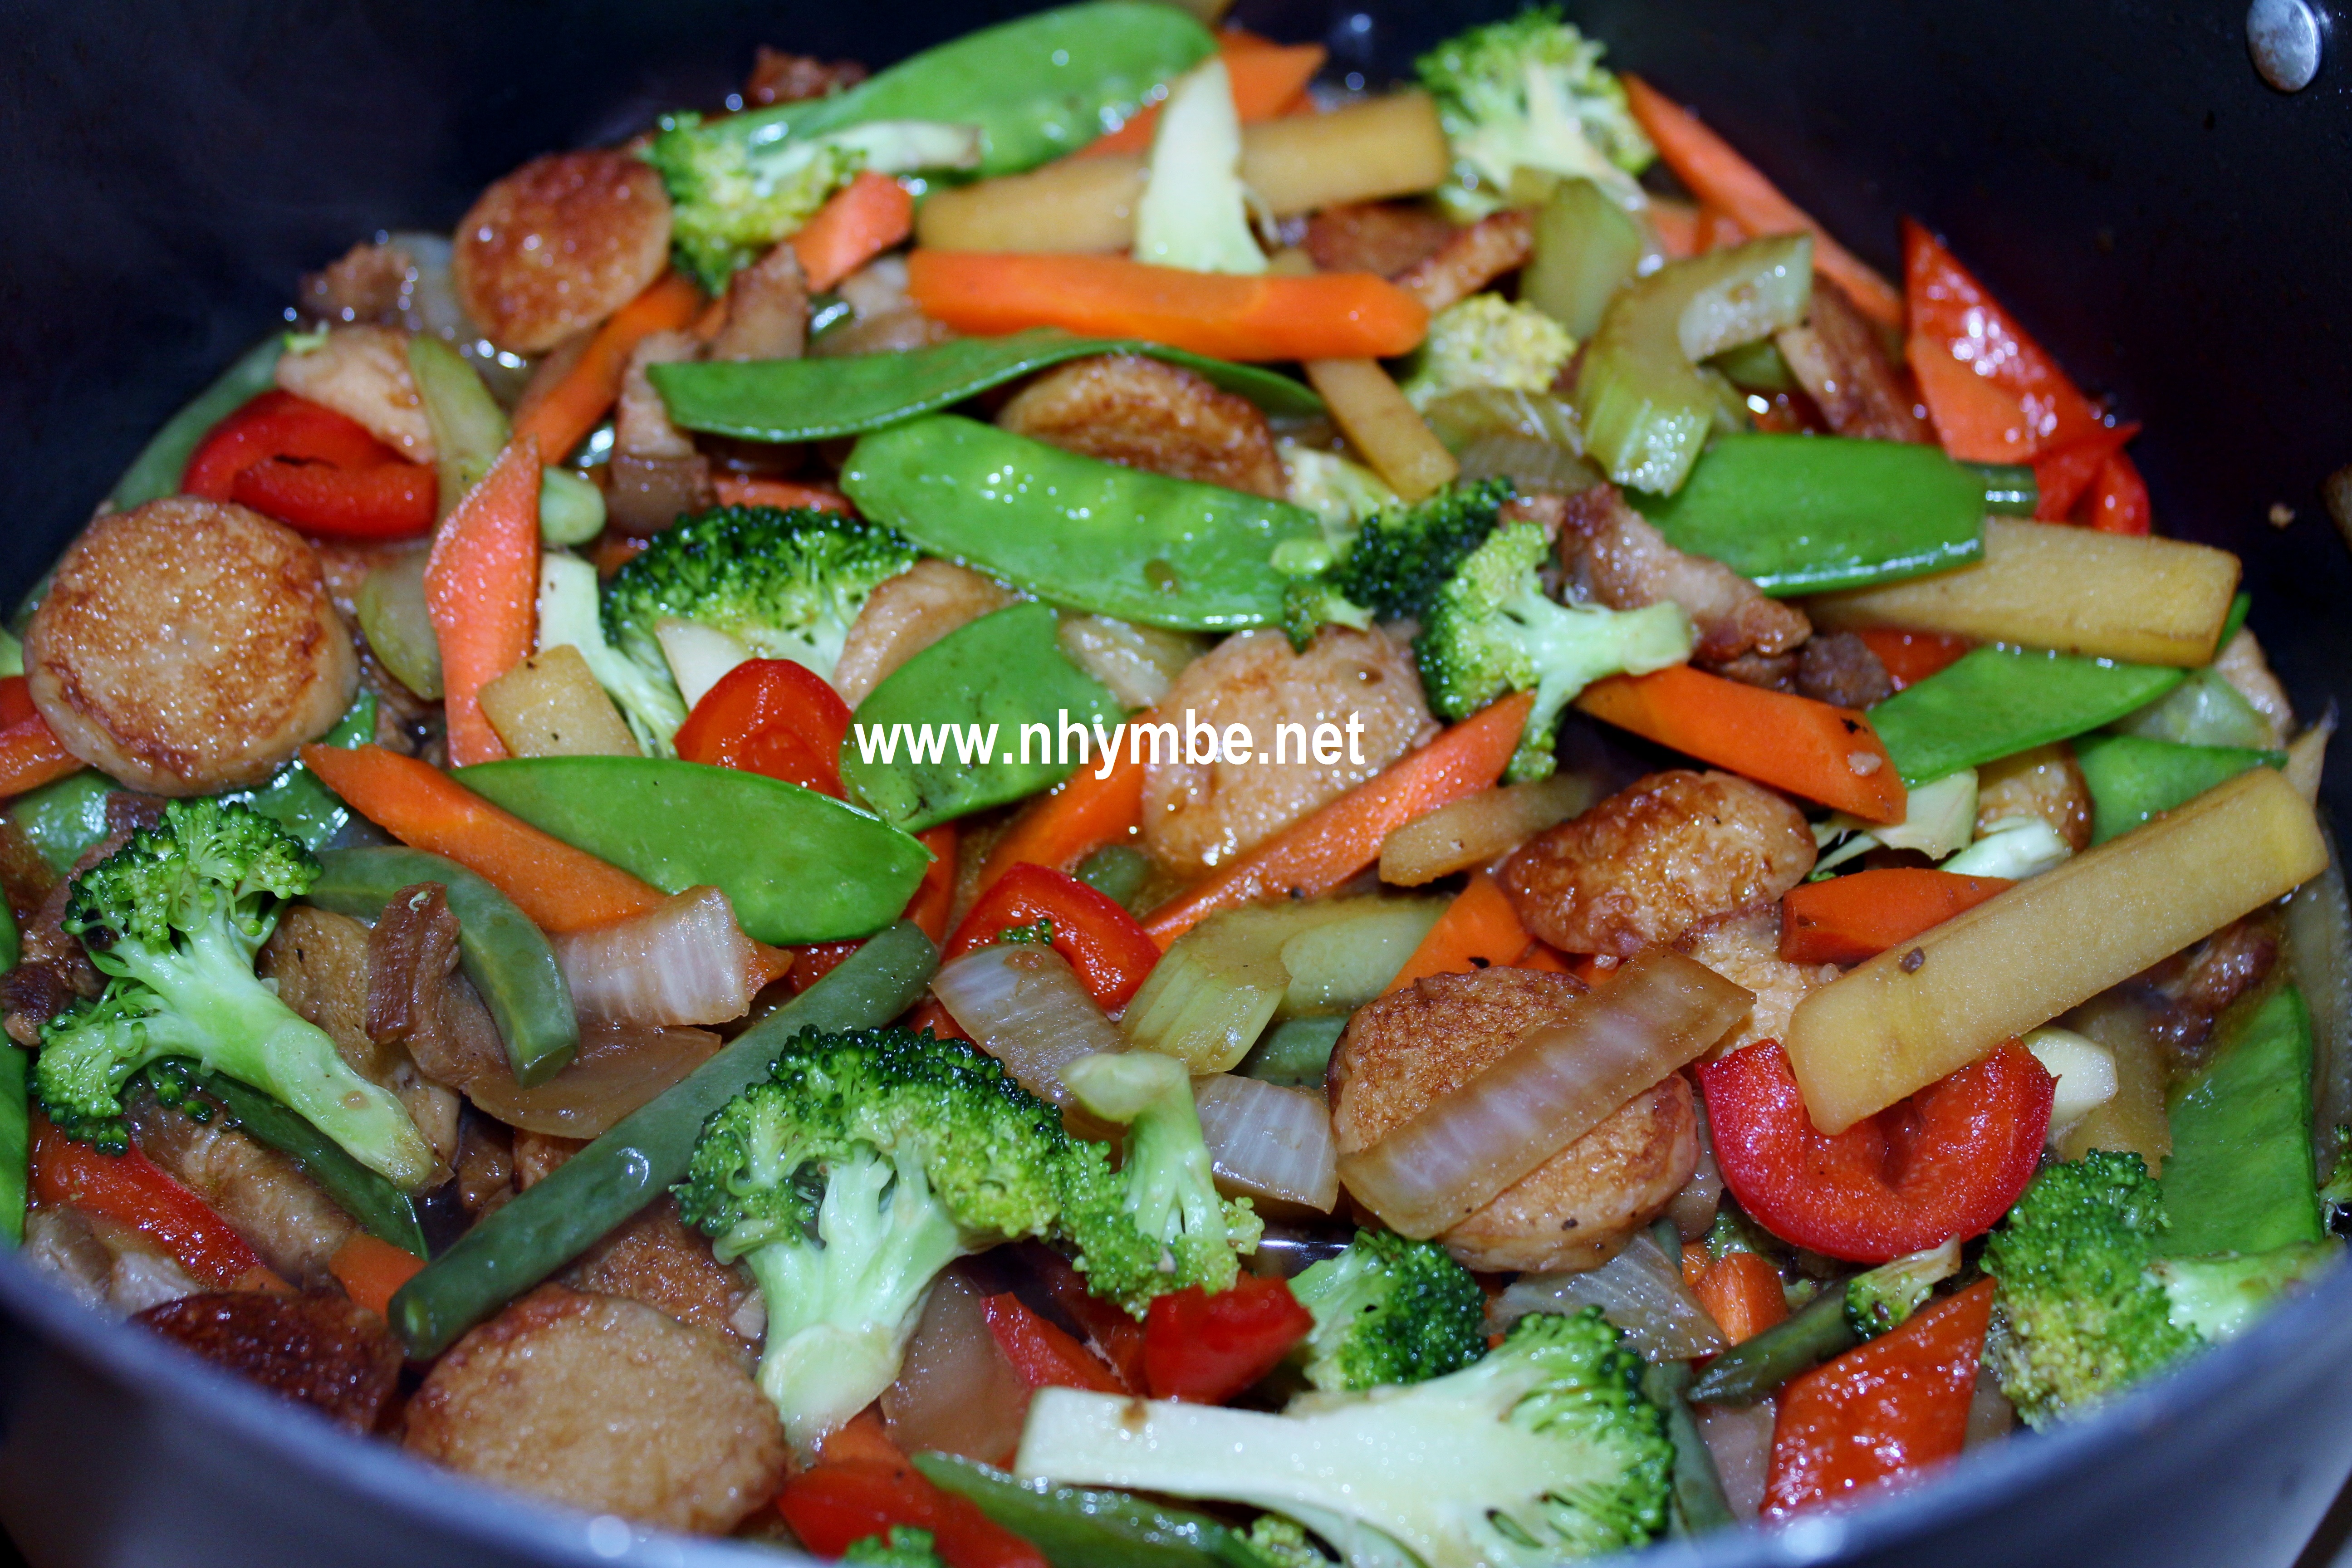 Chop Suey (Filipino-Chinese Stir-Fried Vegetables) - The Foodie Takes Flight